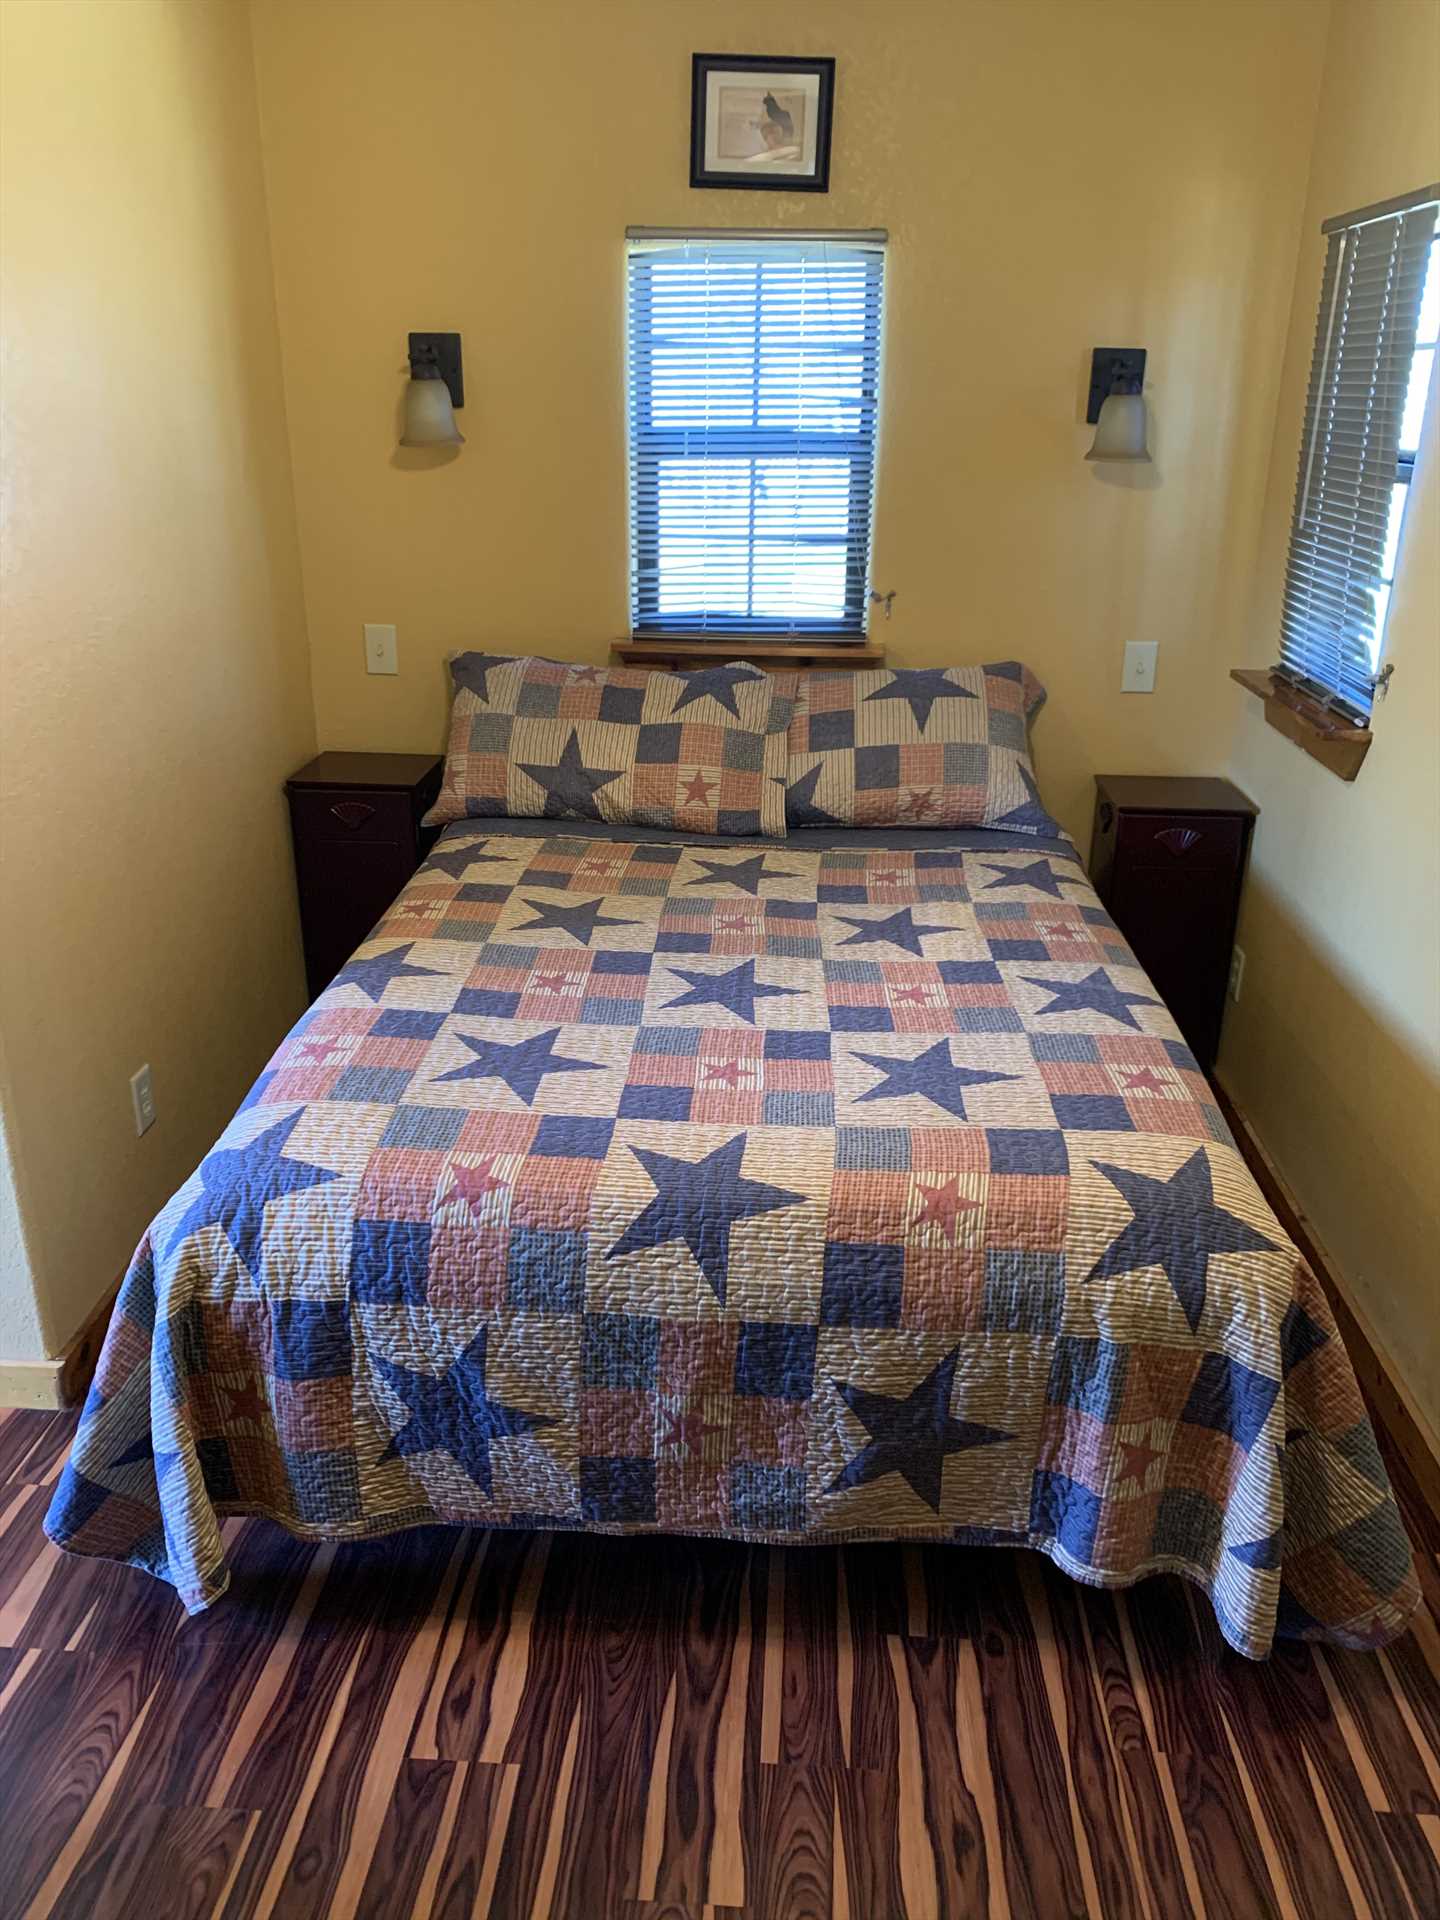                                                 The queen bed provides sweet slumber for two, and there is a roll-away bed option available for a third guest.